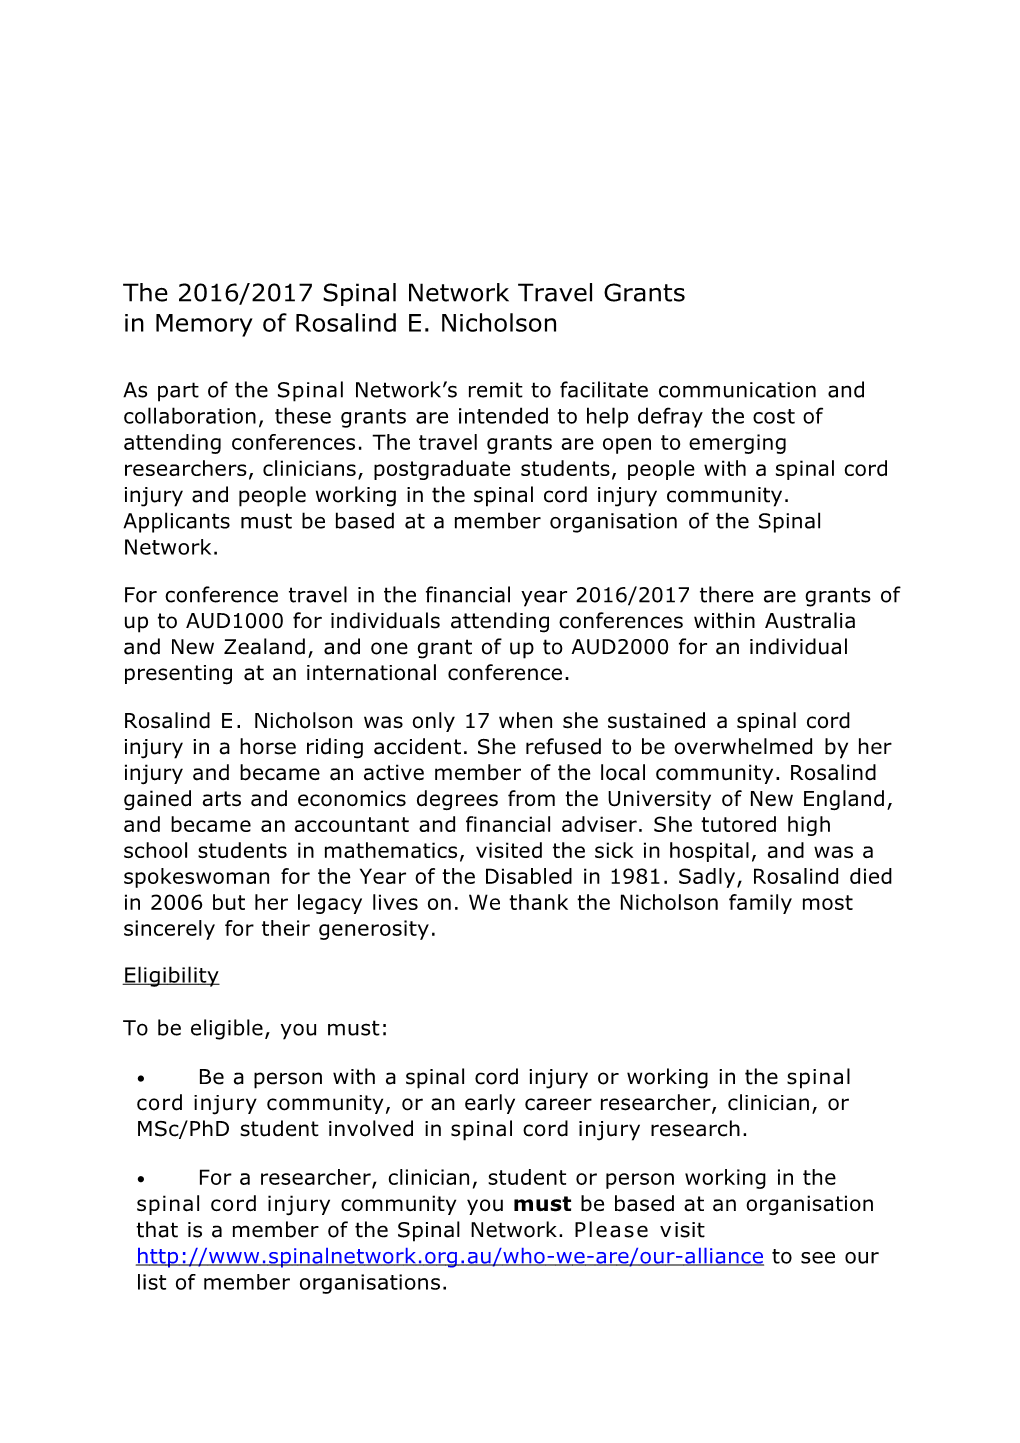 The 2016/2017 Spinal Network Travel Grants